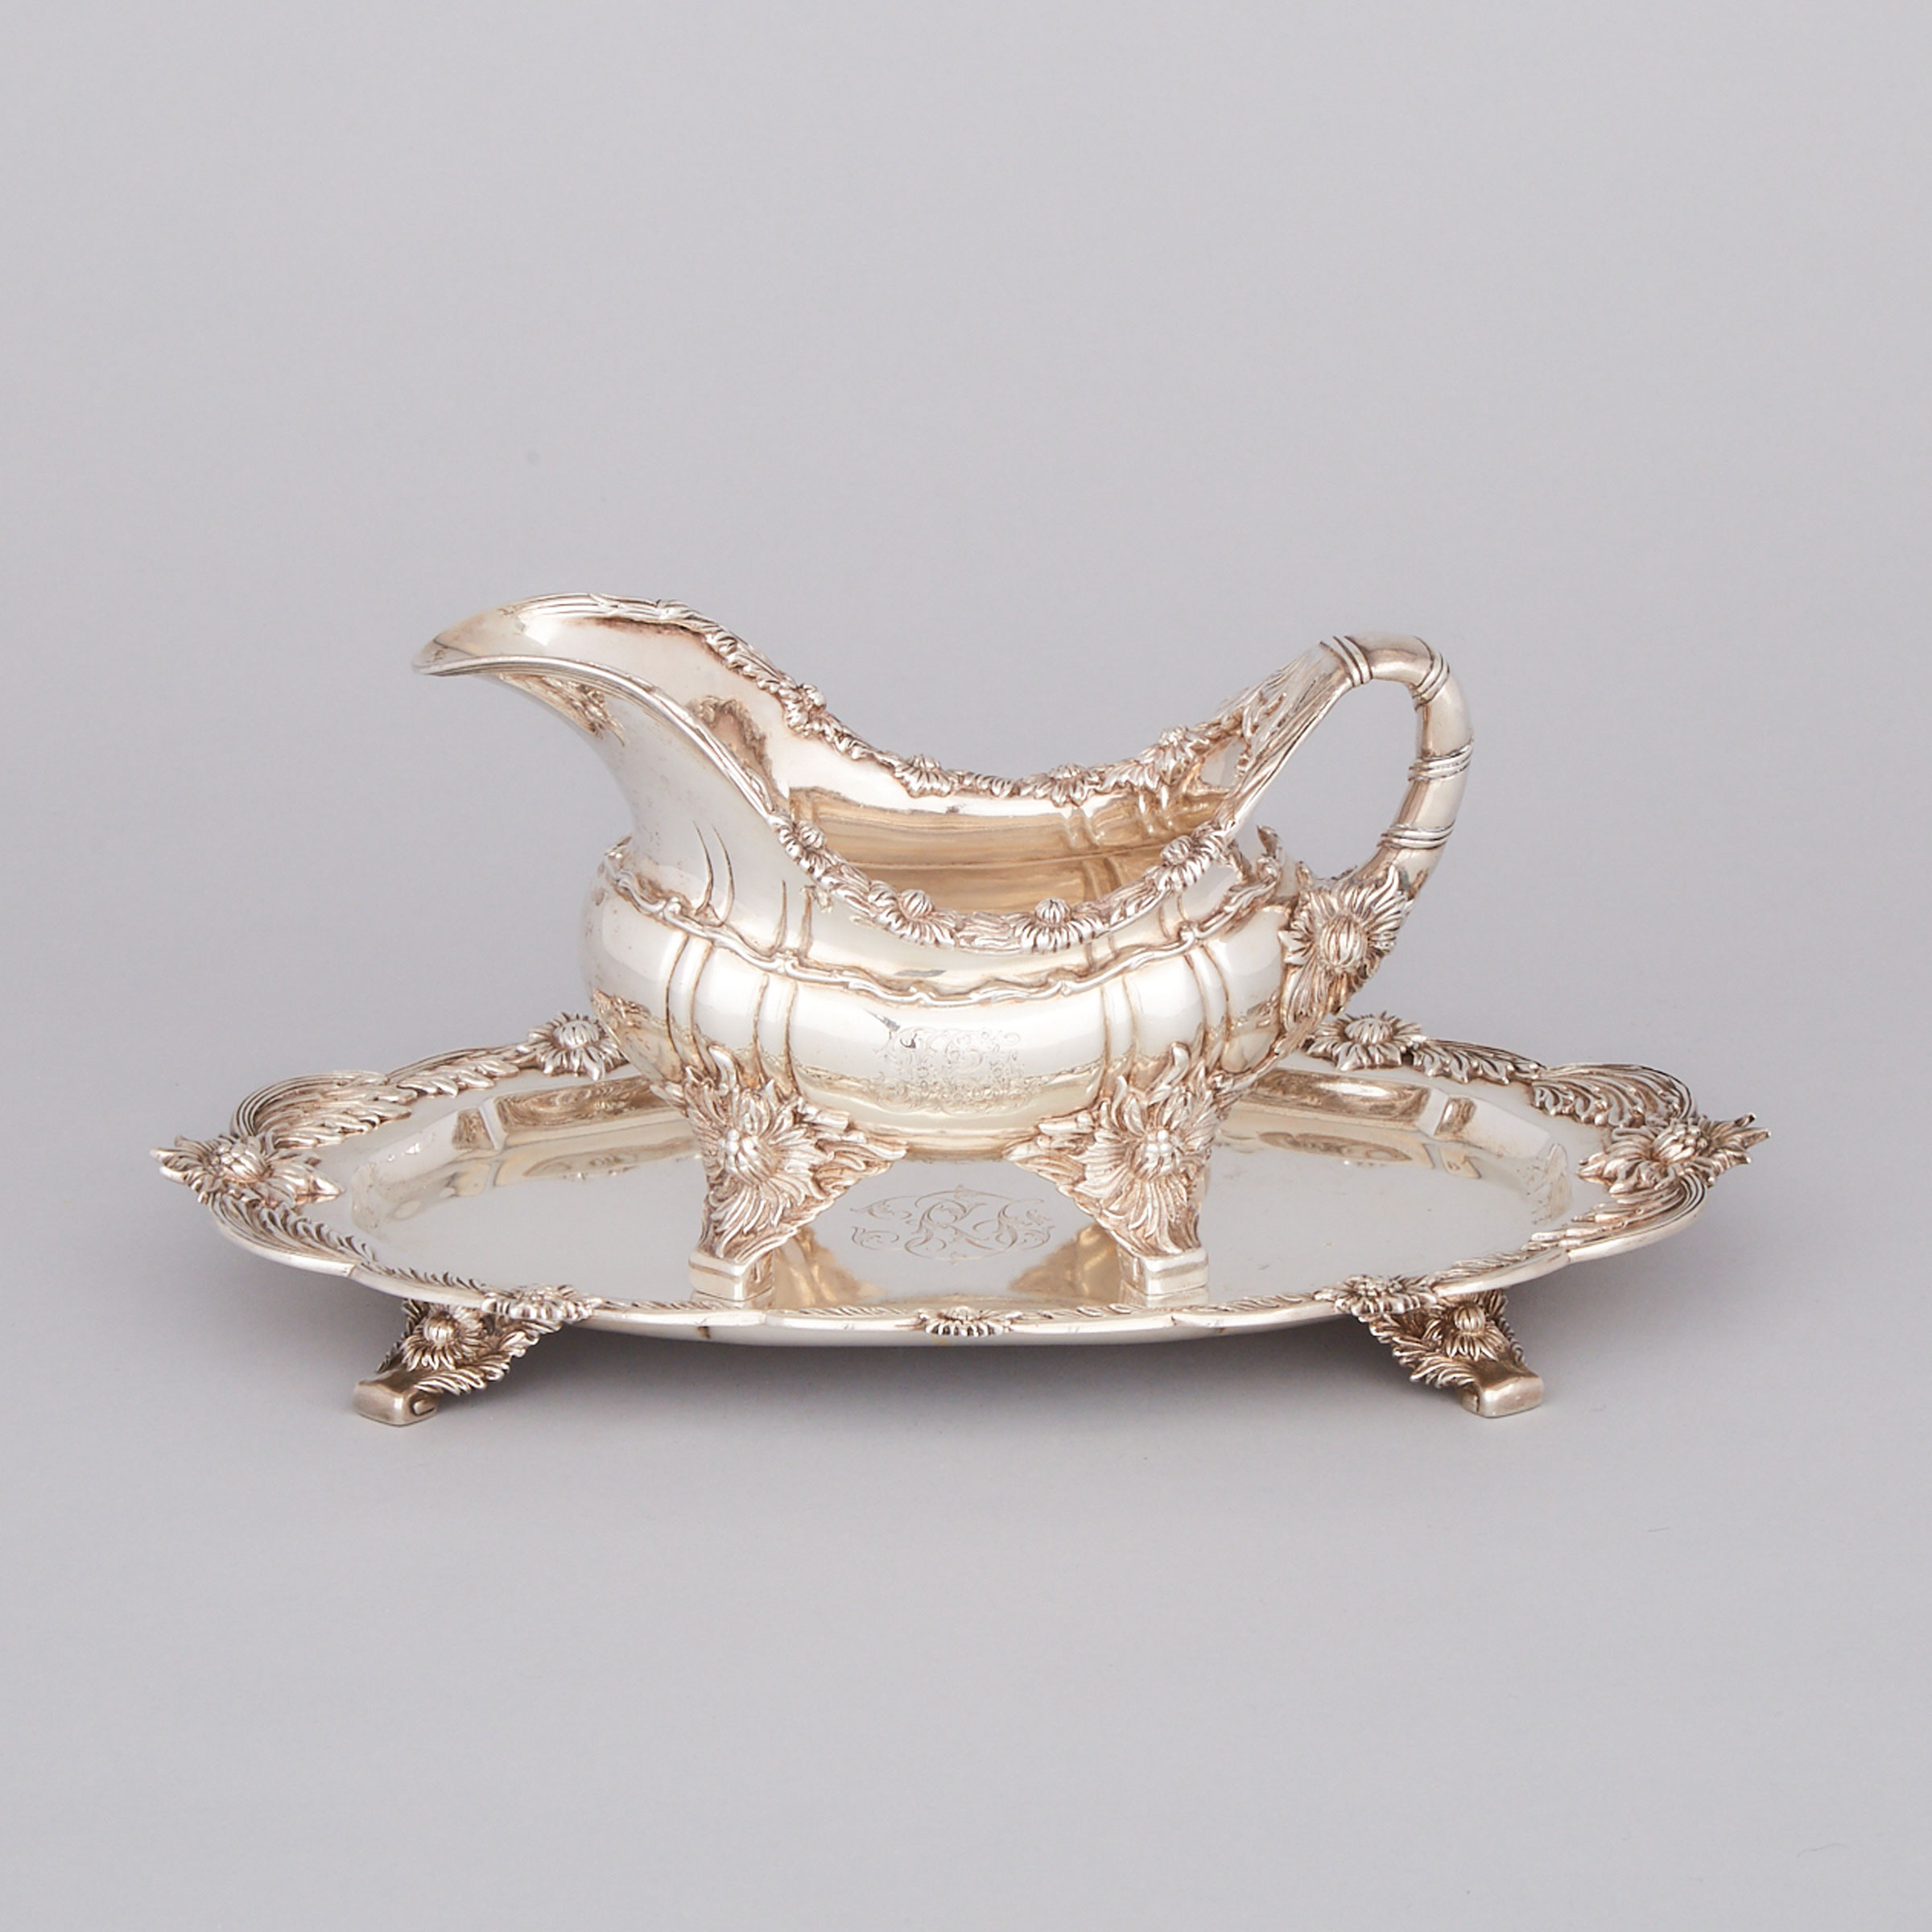 American Silver ‘Chrysanthemum’ Oval Sauce Boat and Stand, Tiffany & Co., New York, N.Y., c.1891-1902